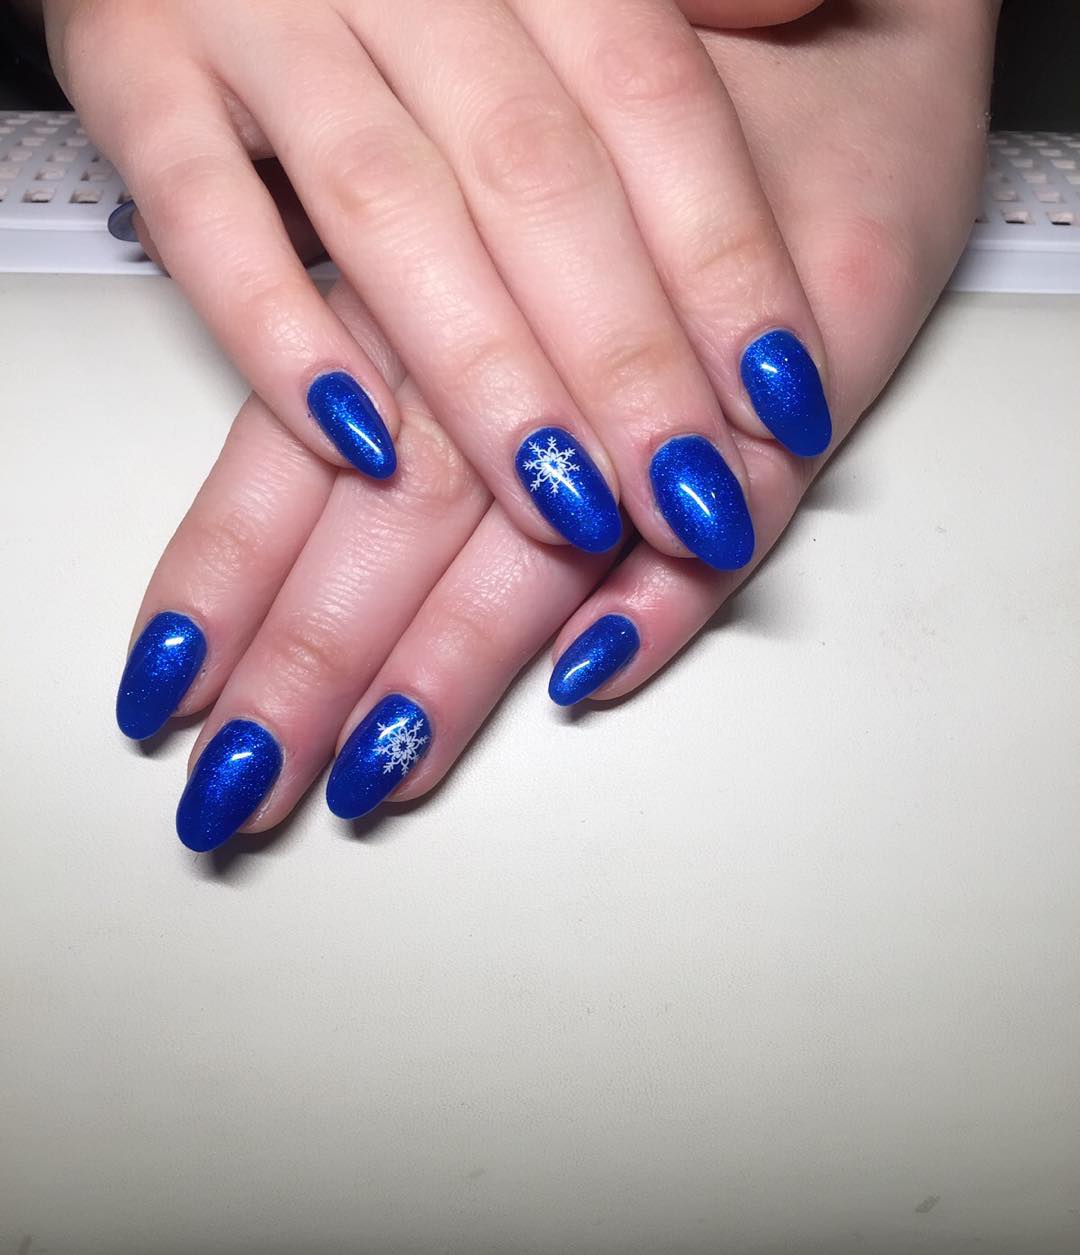 Royal Blue Nails With Accent Snowflakes Design Idea